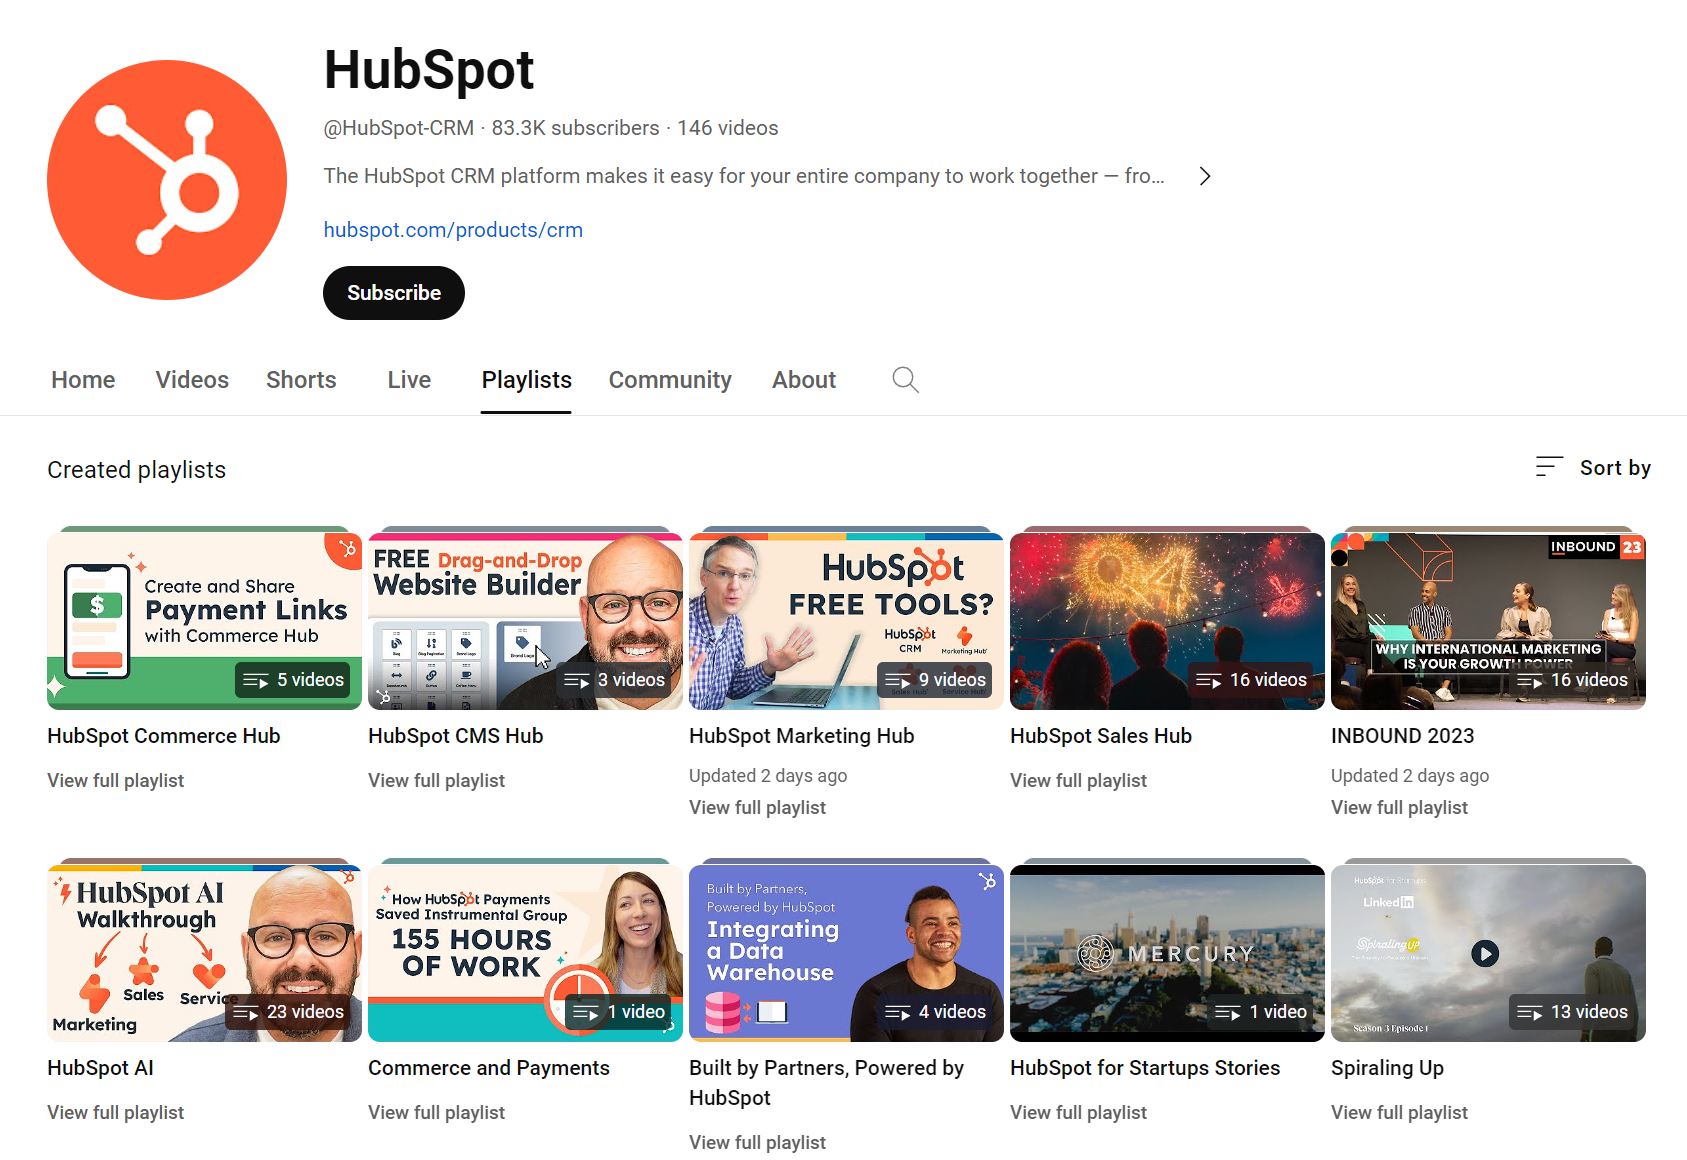 HubSpot has invested in video content creation, with a number of playlists on YouTube.